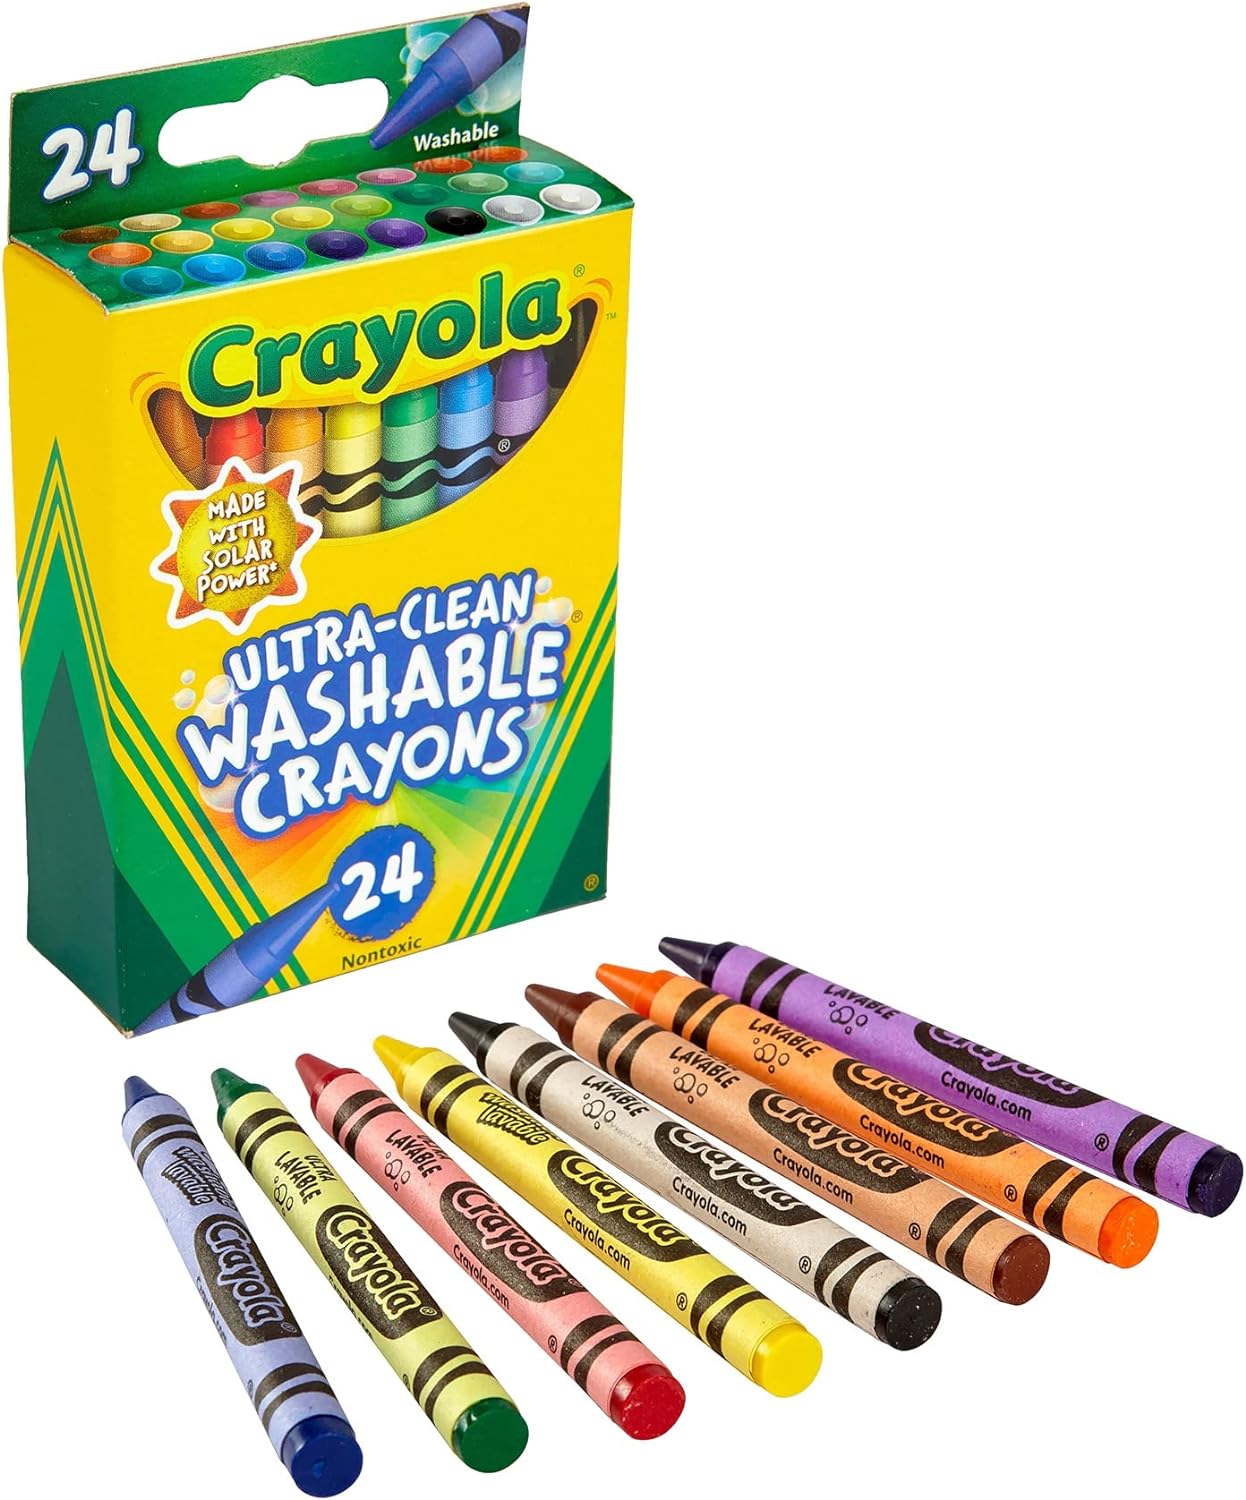 Crayola Ultra-Clean Washable Crayons Pack of 24 526924